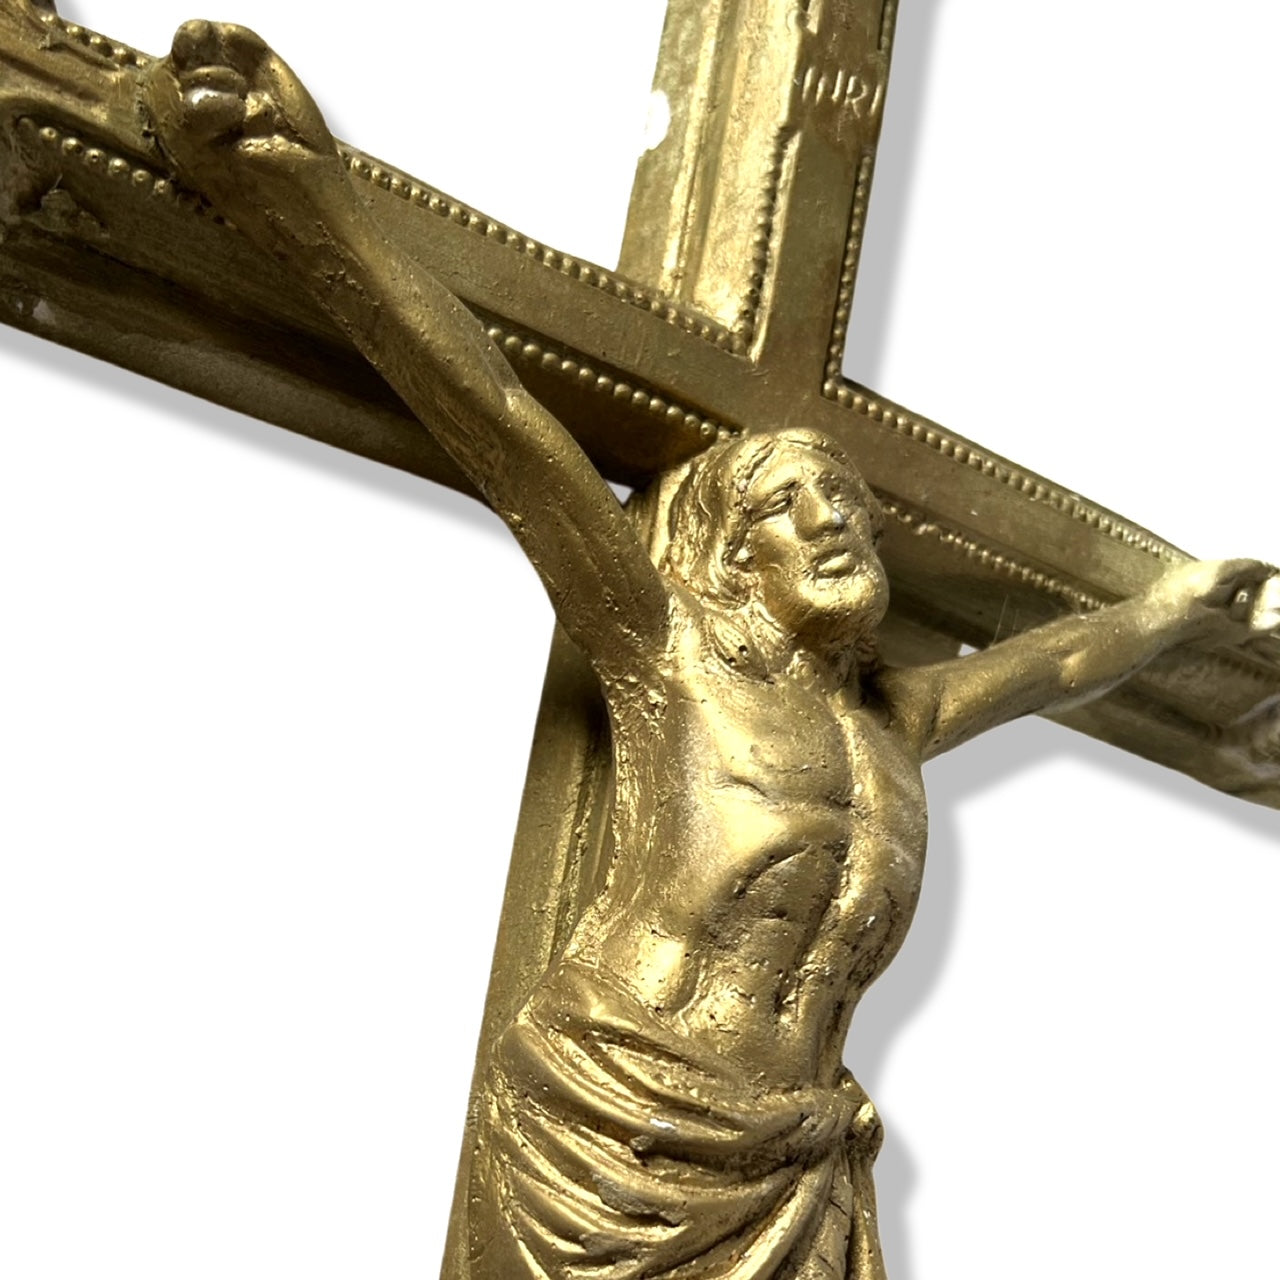 C. 1960's Plaster Gold Painted Crucifix